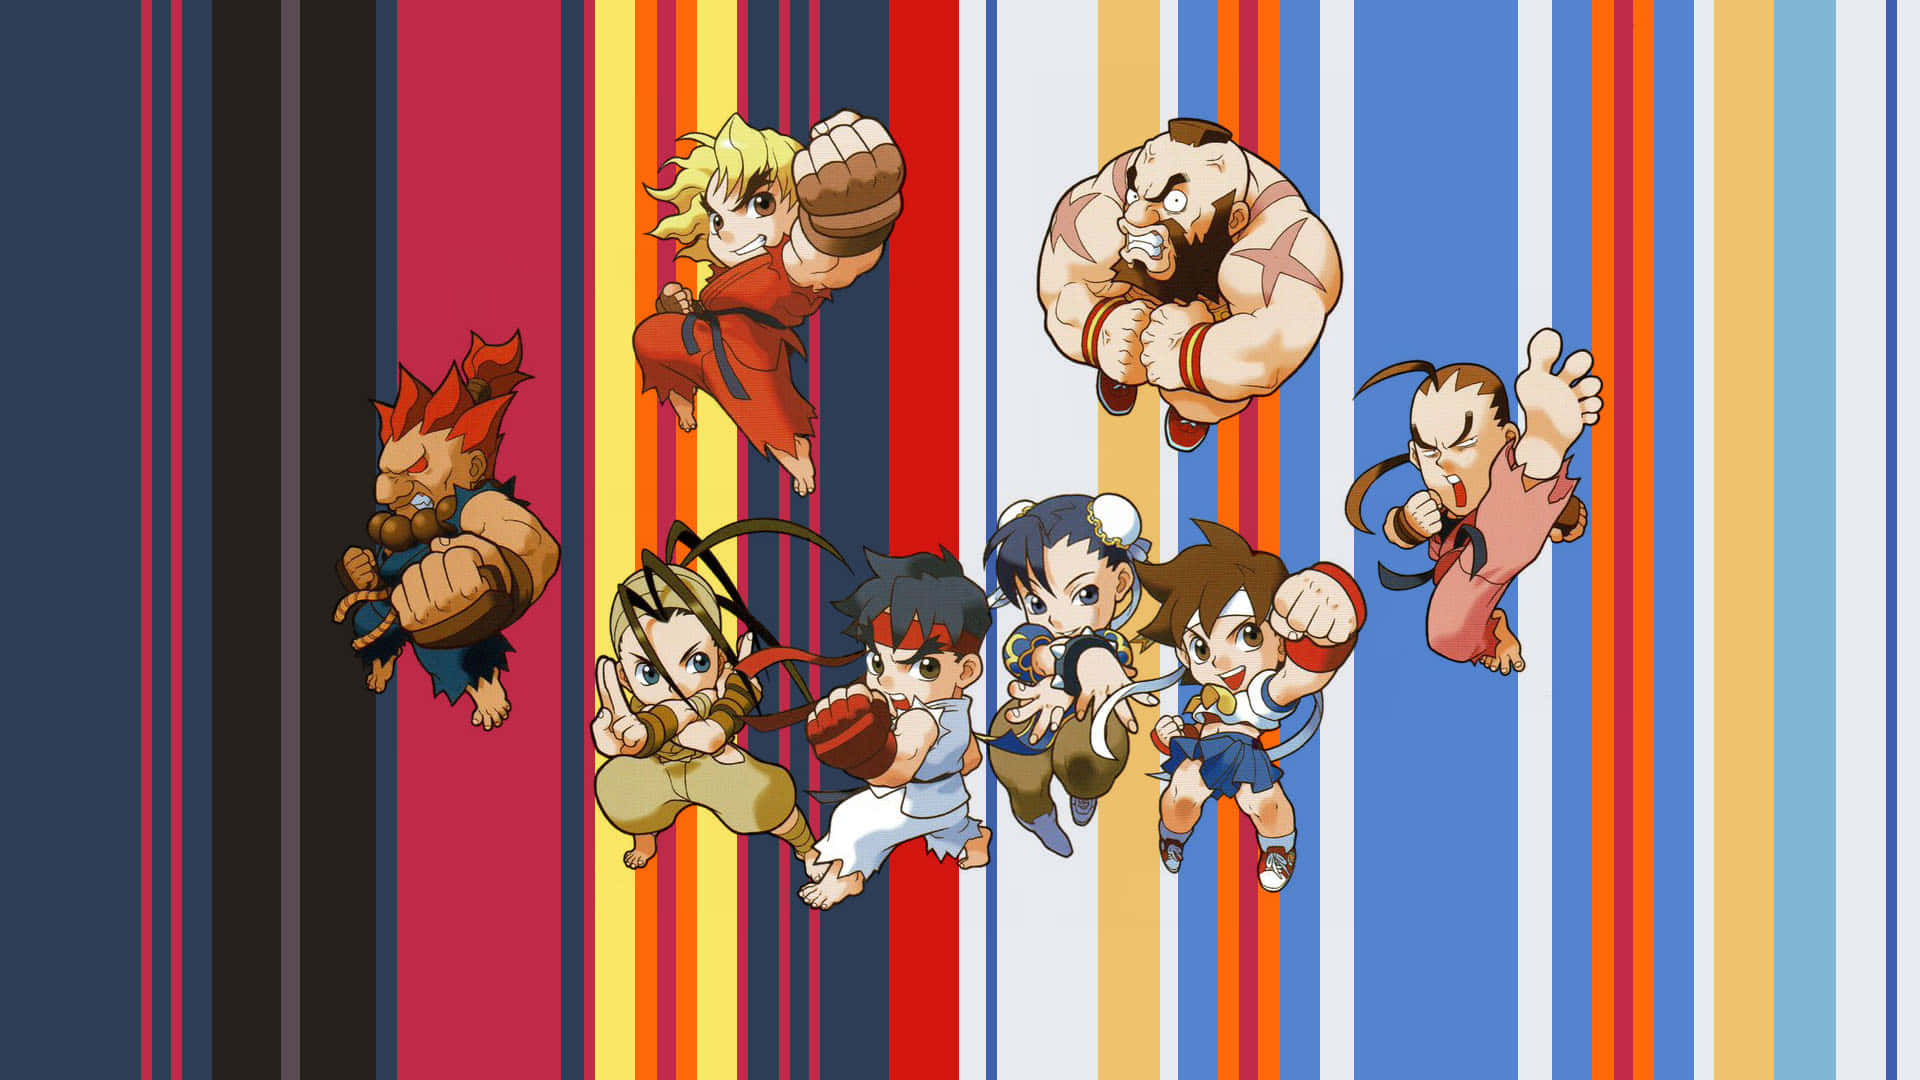 Chibi Street Fighter Characters Wallpaper